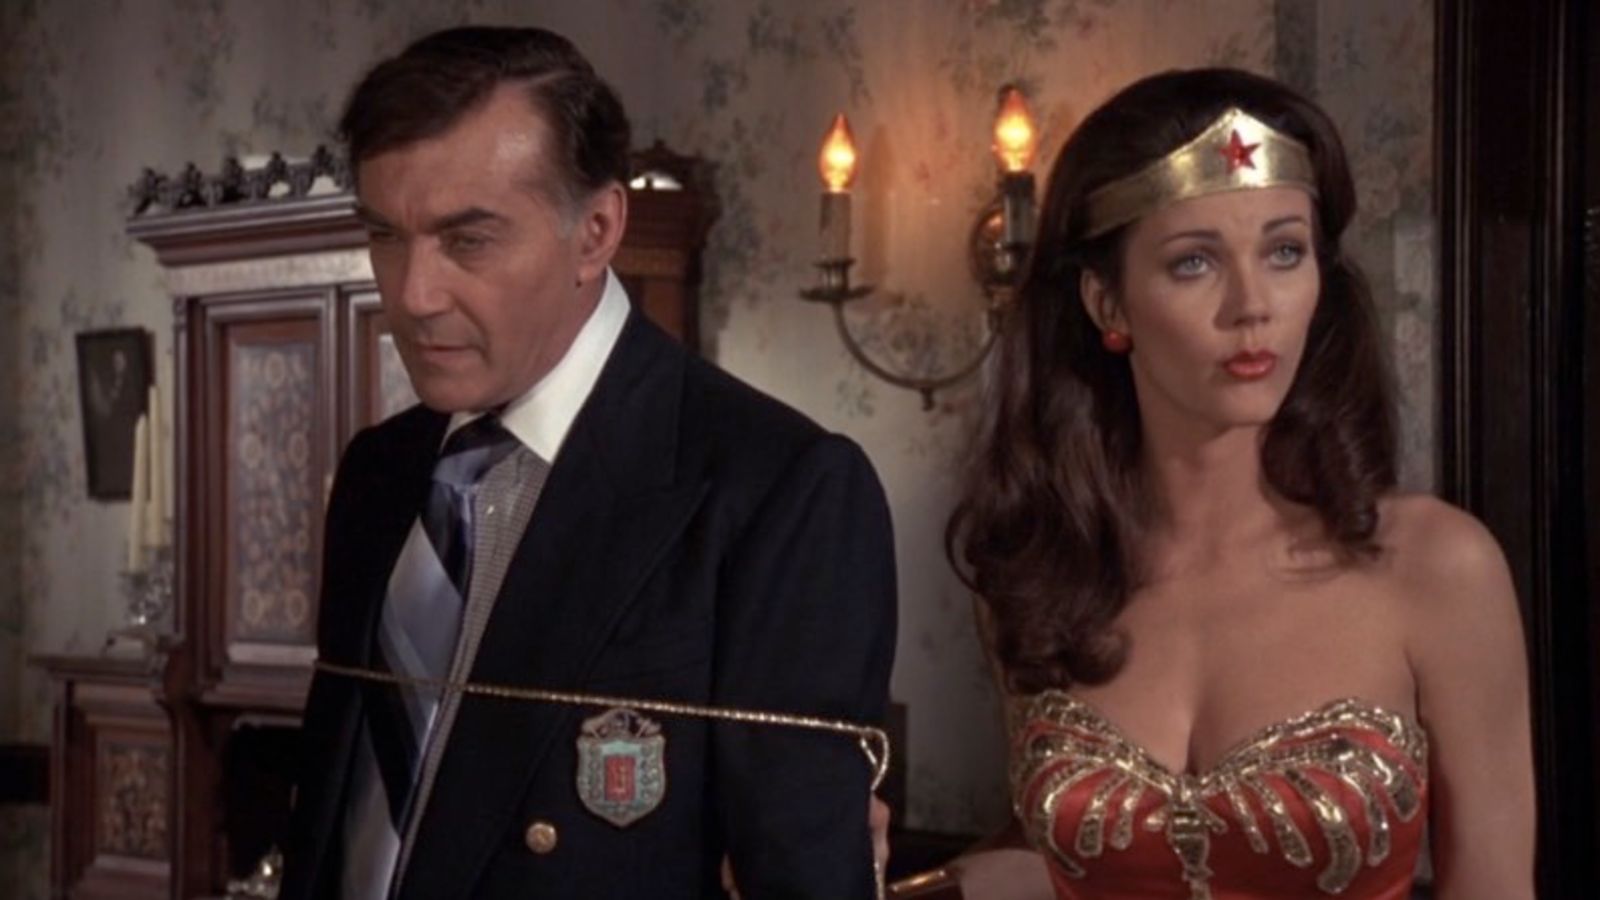 Wonder Woman The Complete Collection 1975 1979 Blu Ray July 28th Home Theater Forum Home Theater Forum